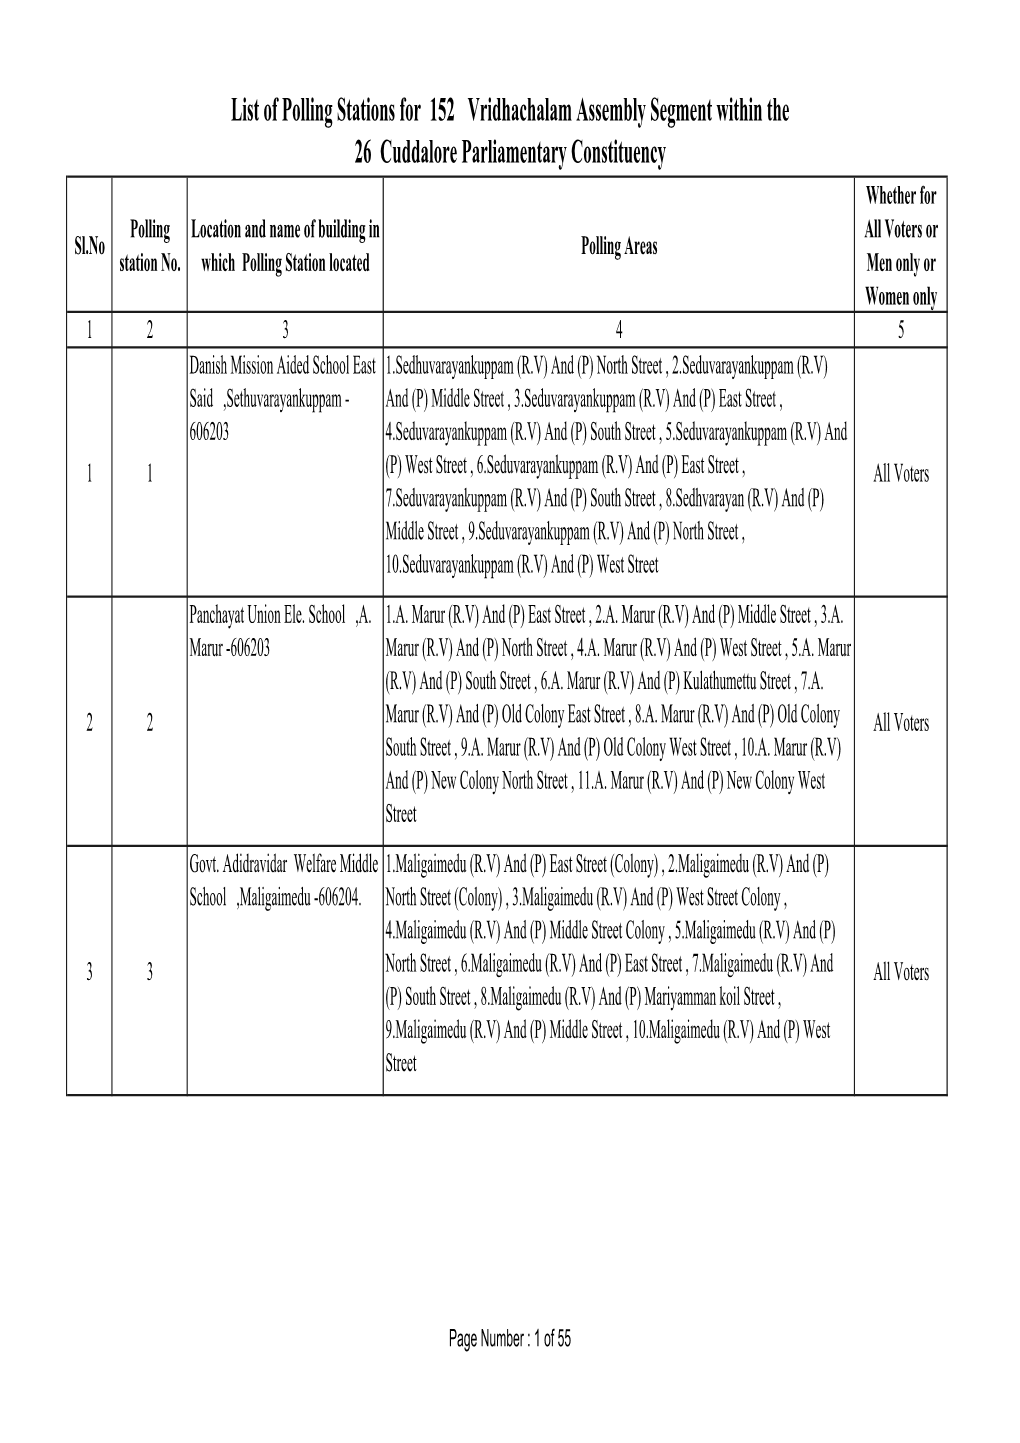 List of Polling Stations for 152 Vridhachalam Assembly Segment